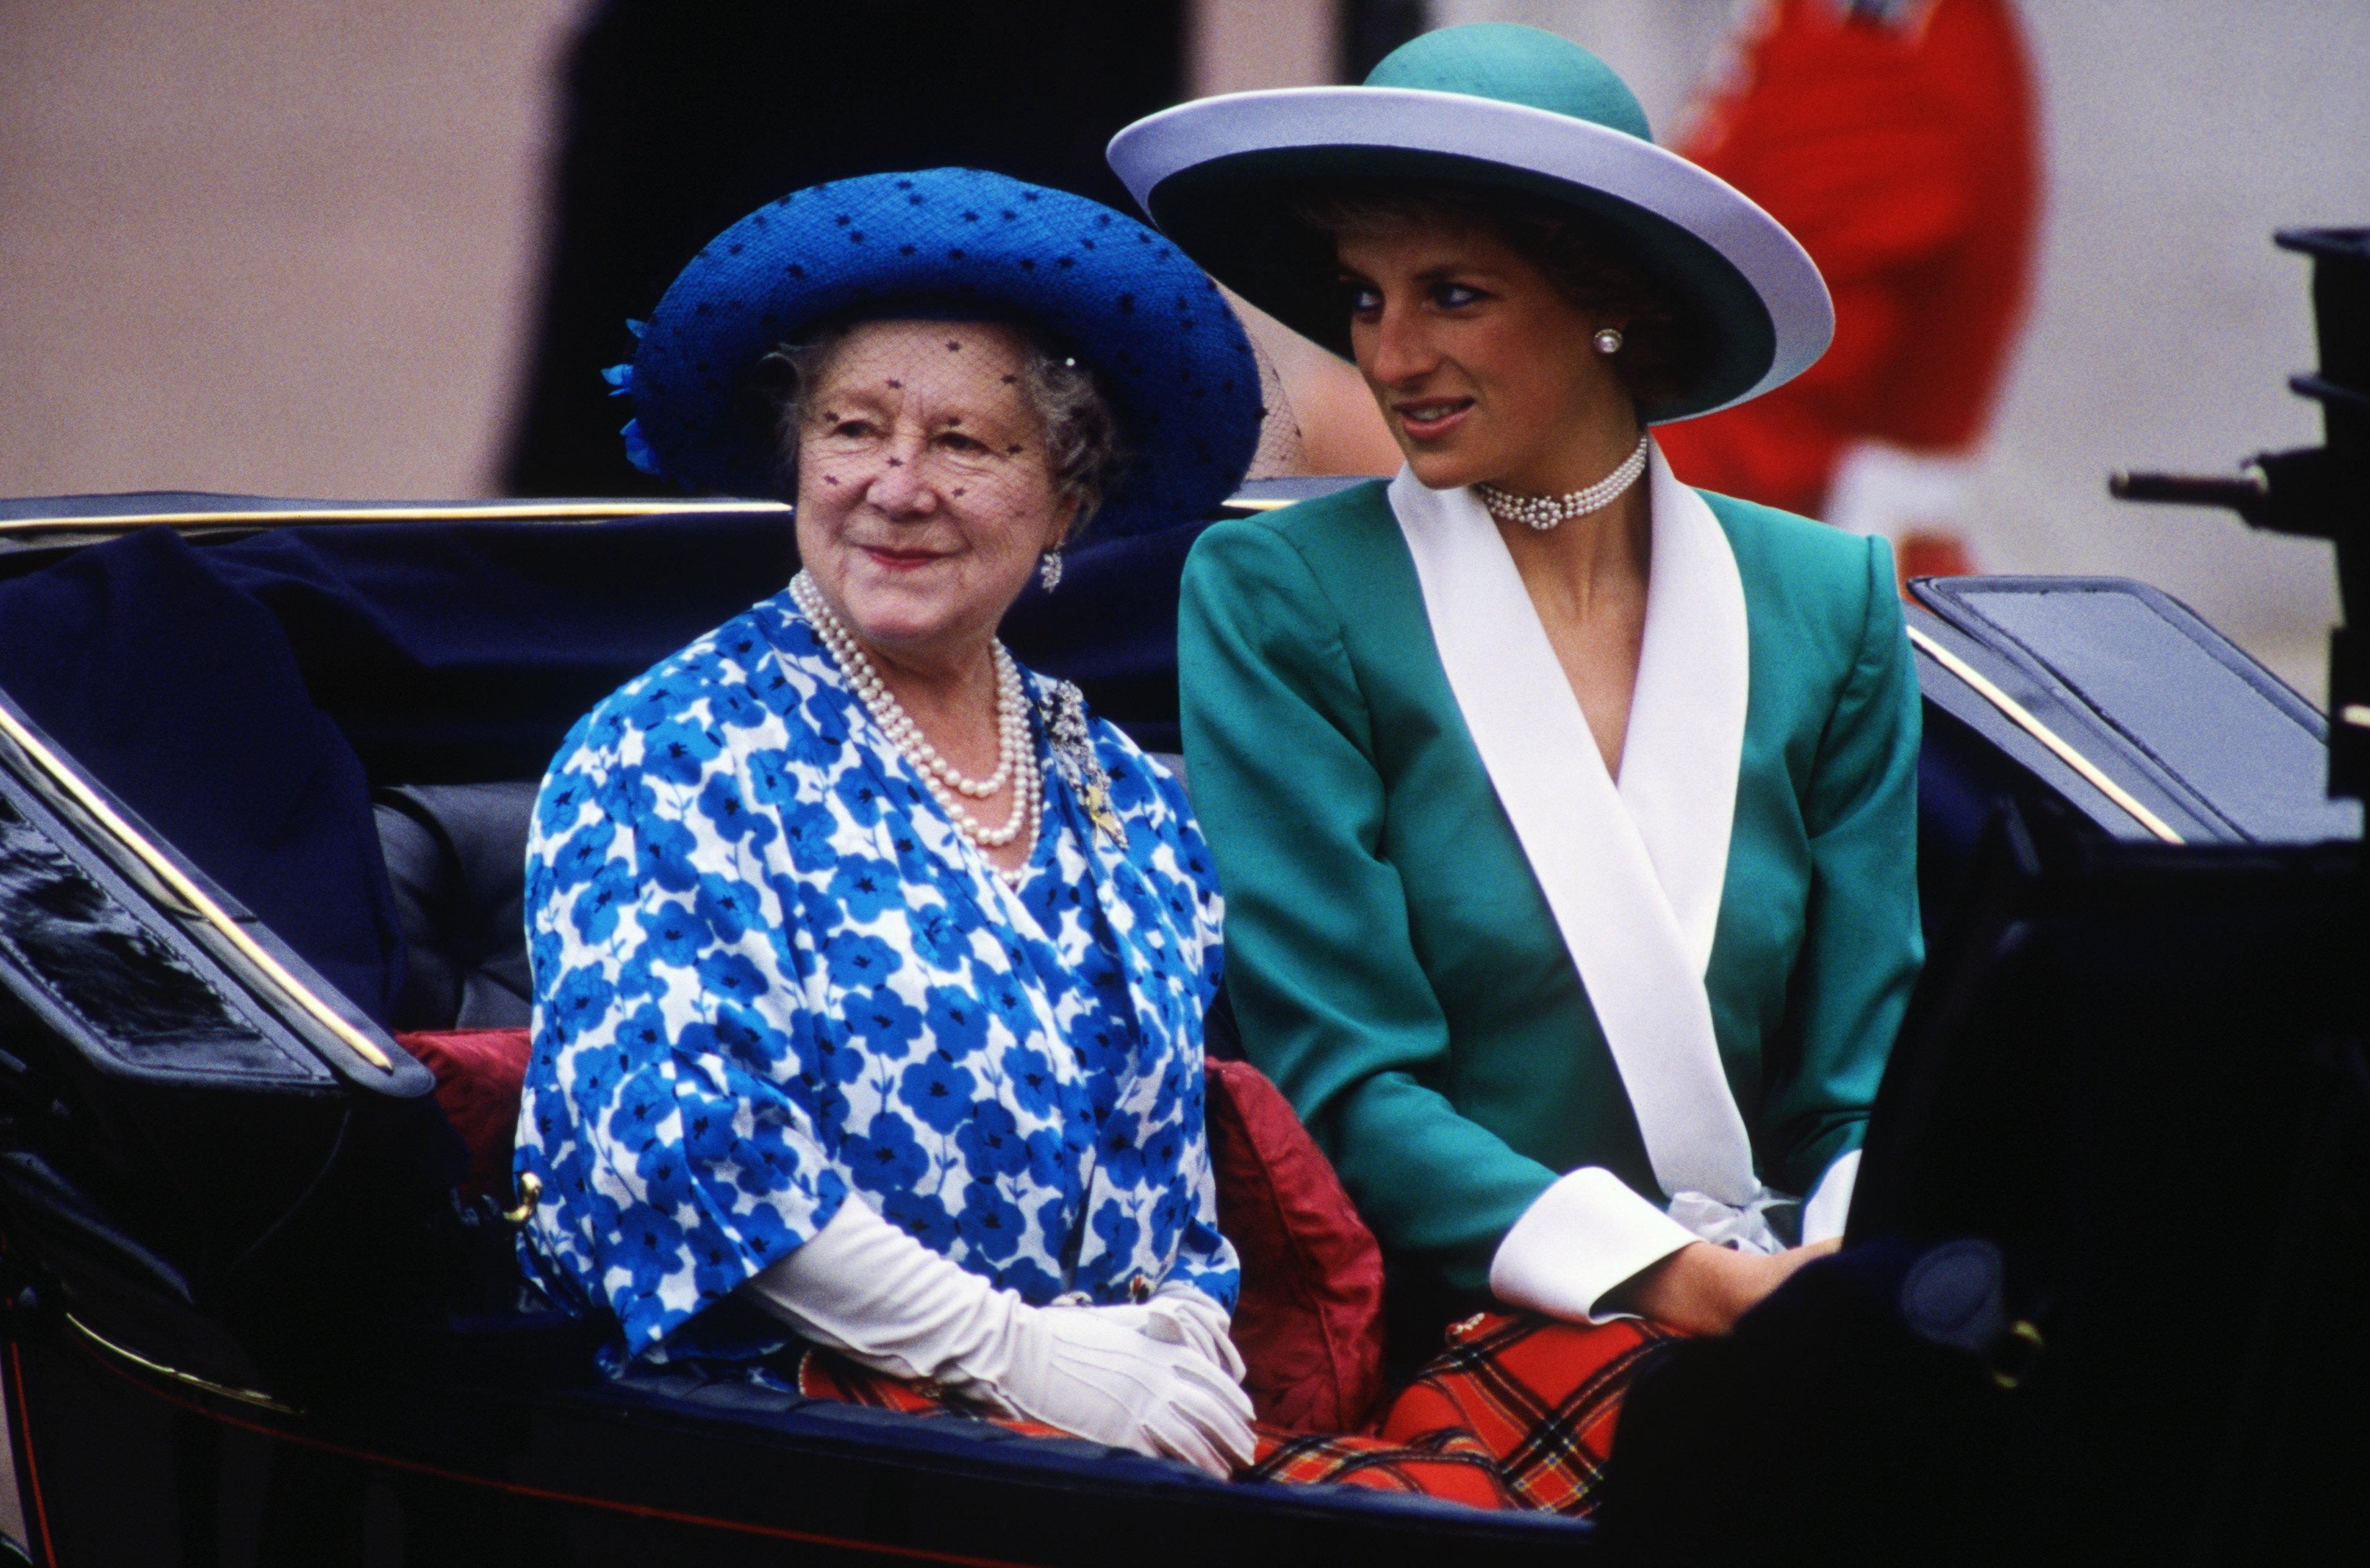 The Queen Mother and Princess Diana leaving Buckingham Palace on June 13, 1987, to attend the Trooping the Colour ceremony in London. | Source: Getty Images.